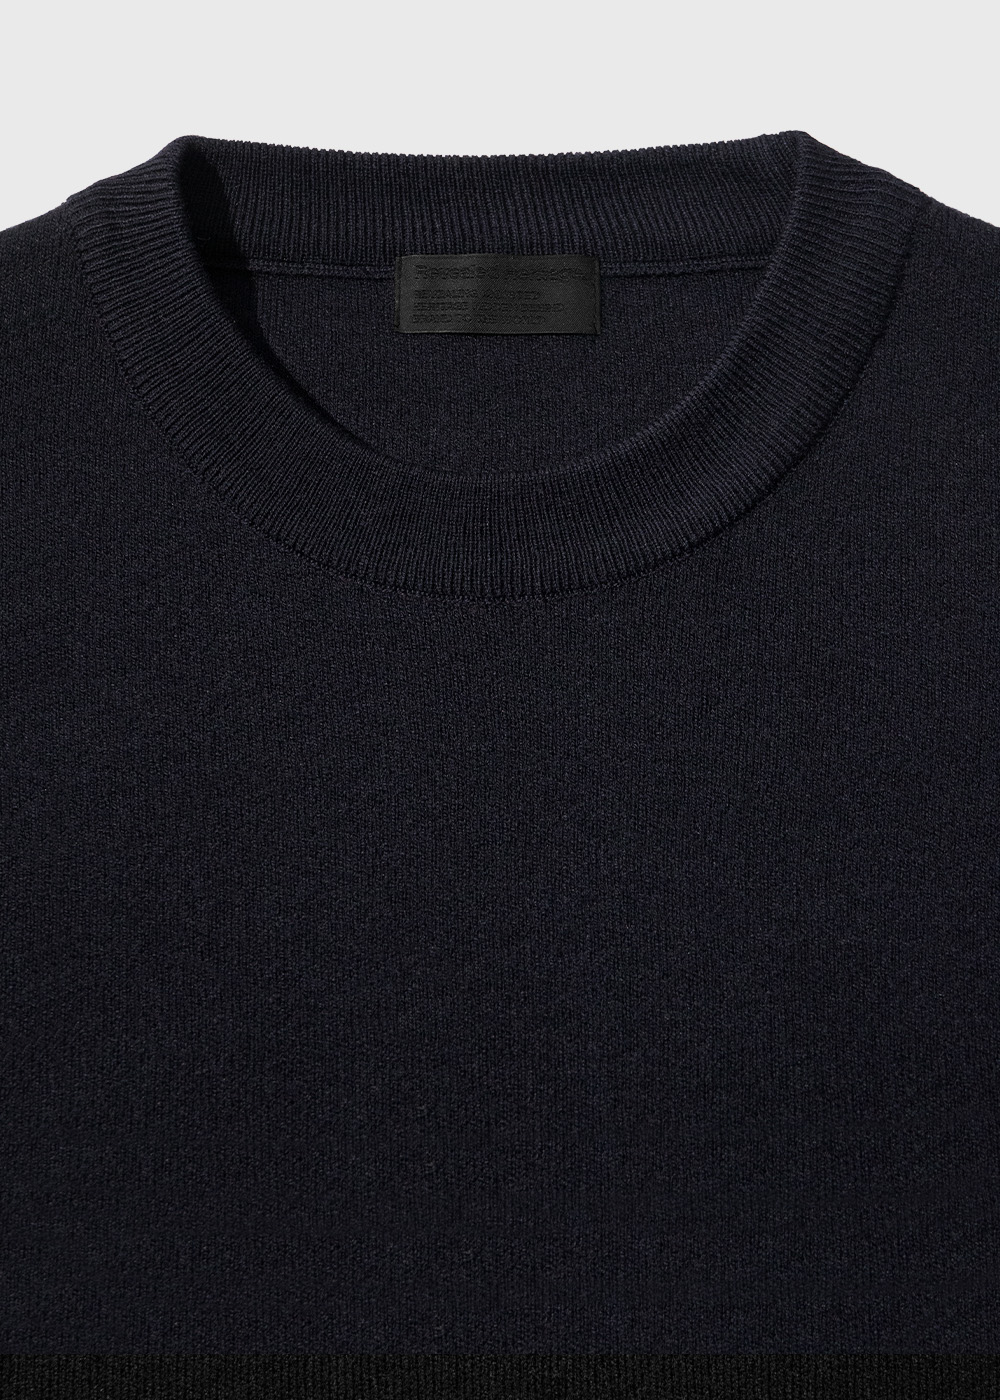 Wool Blended Classic Crewneck Knit _ navy